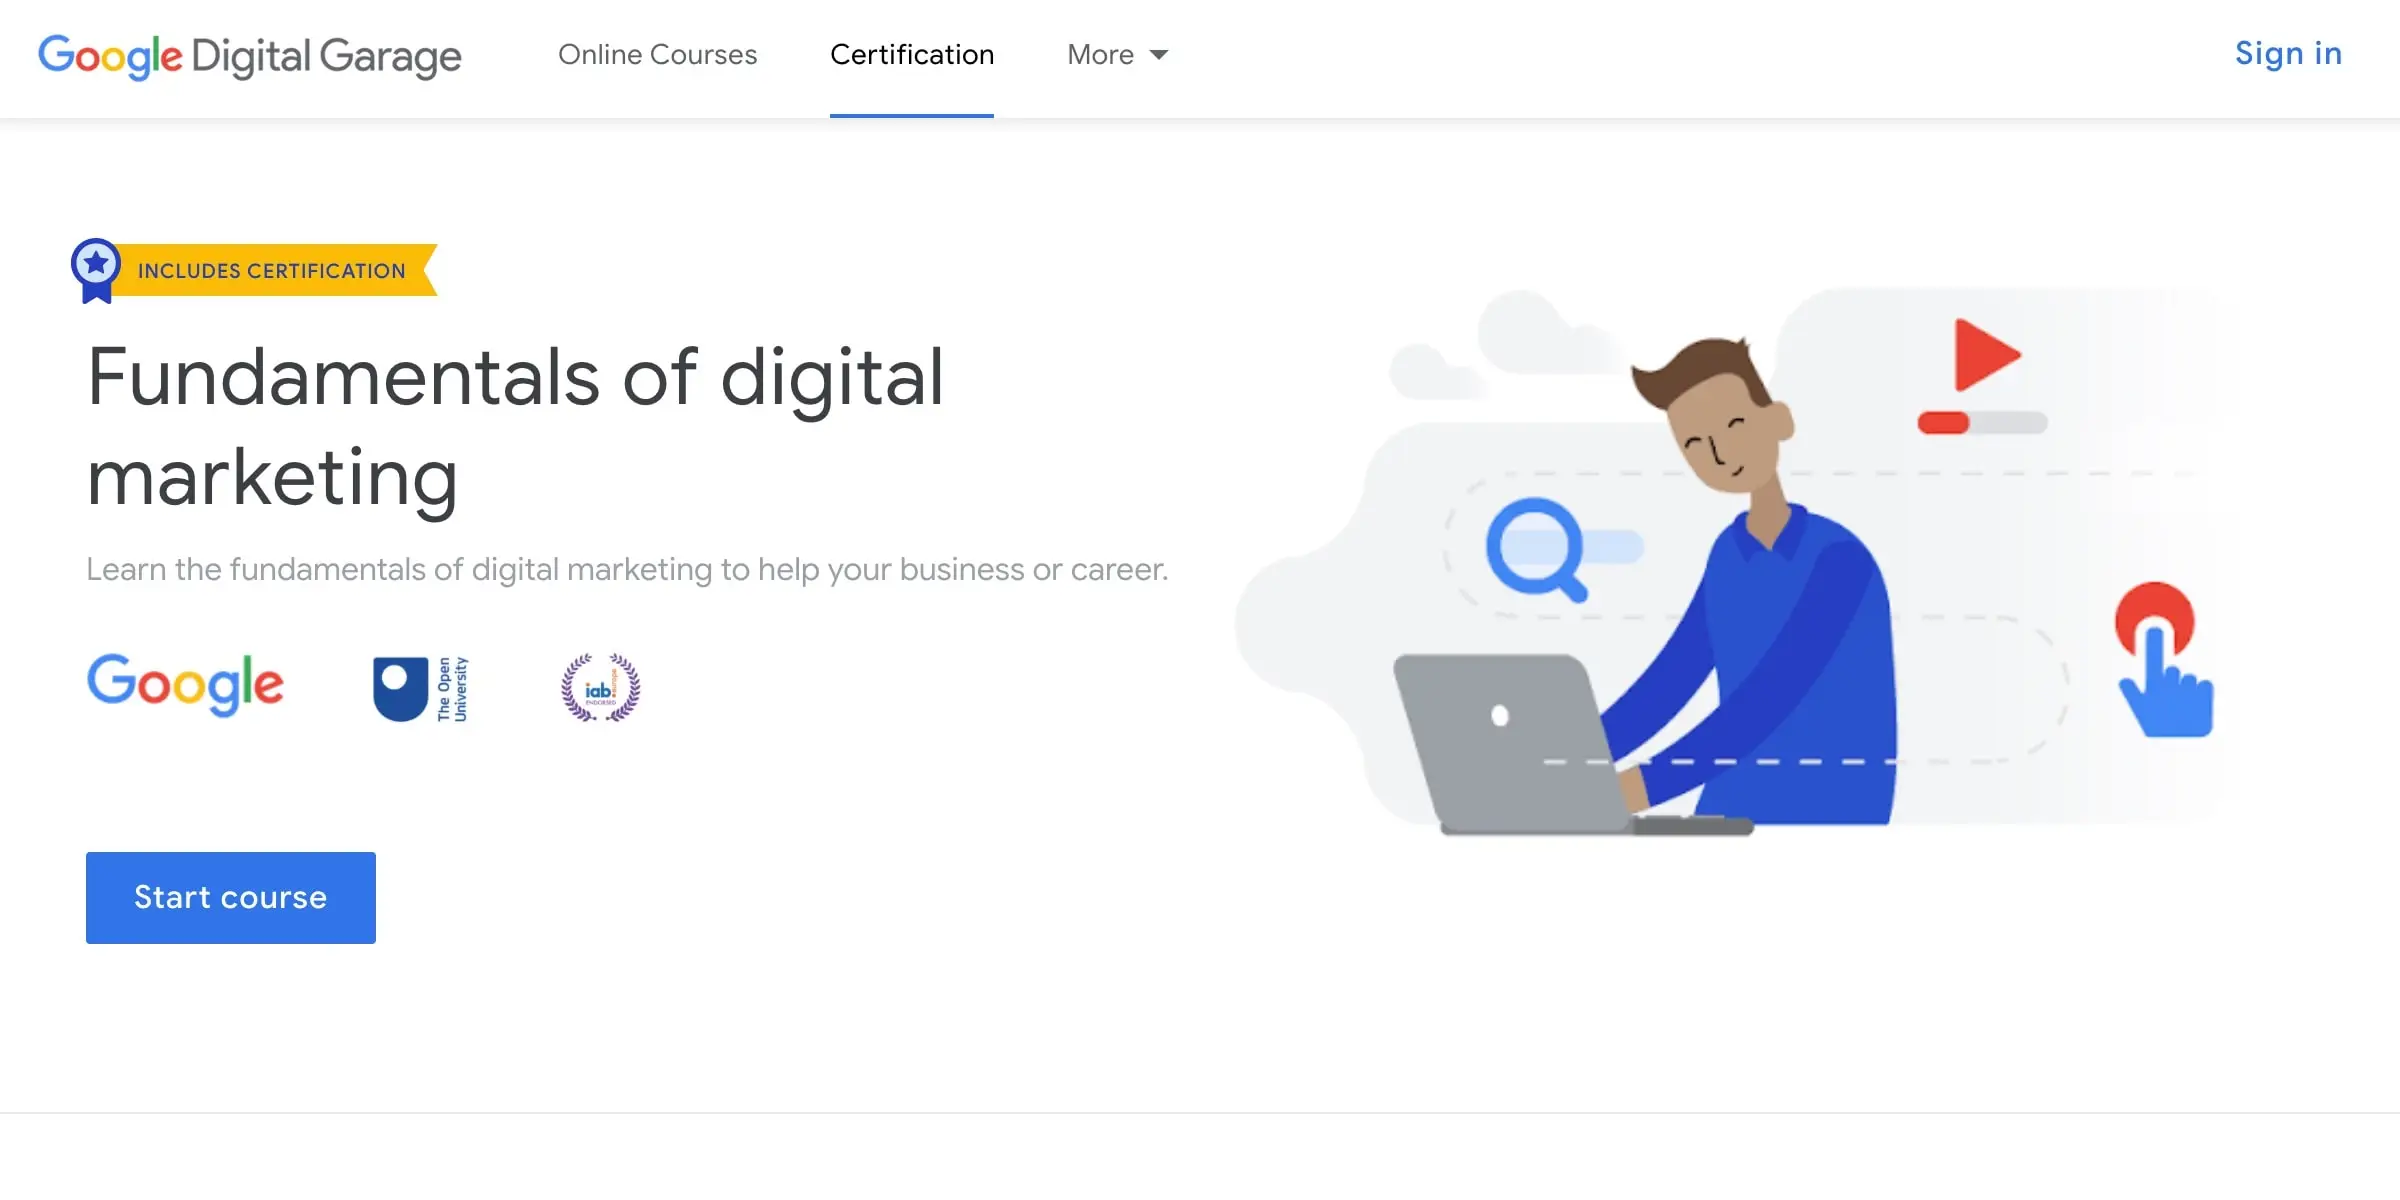 100+ Free Online Courses with Certificates.